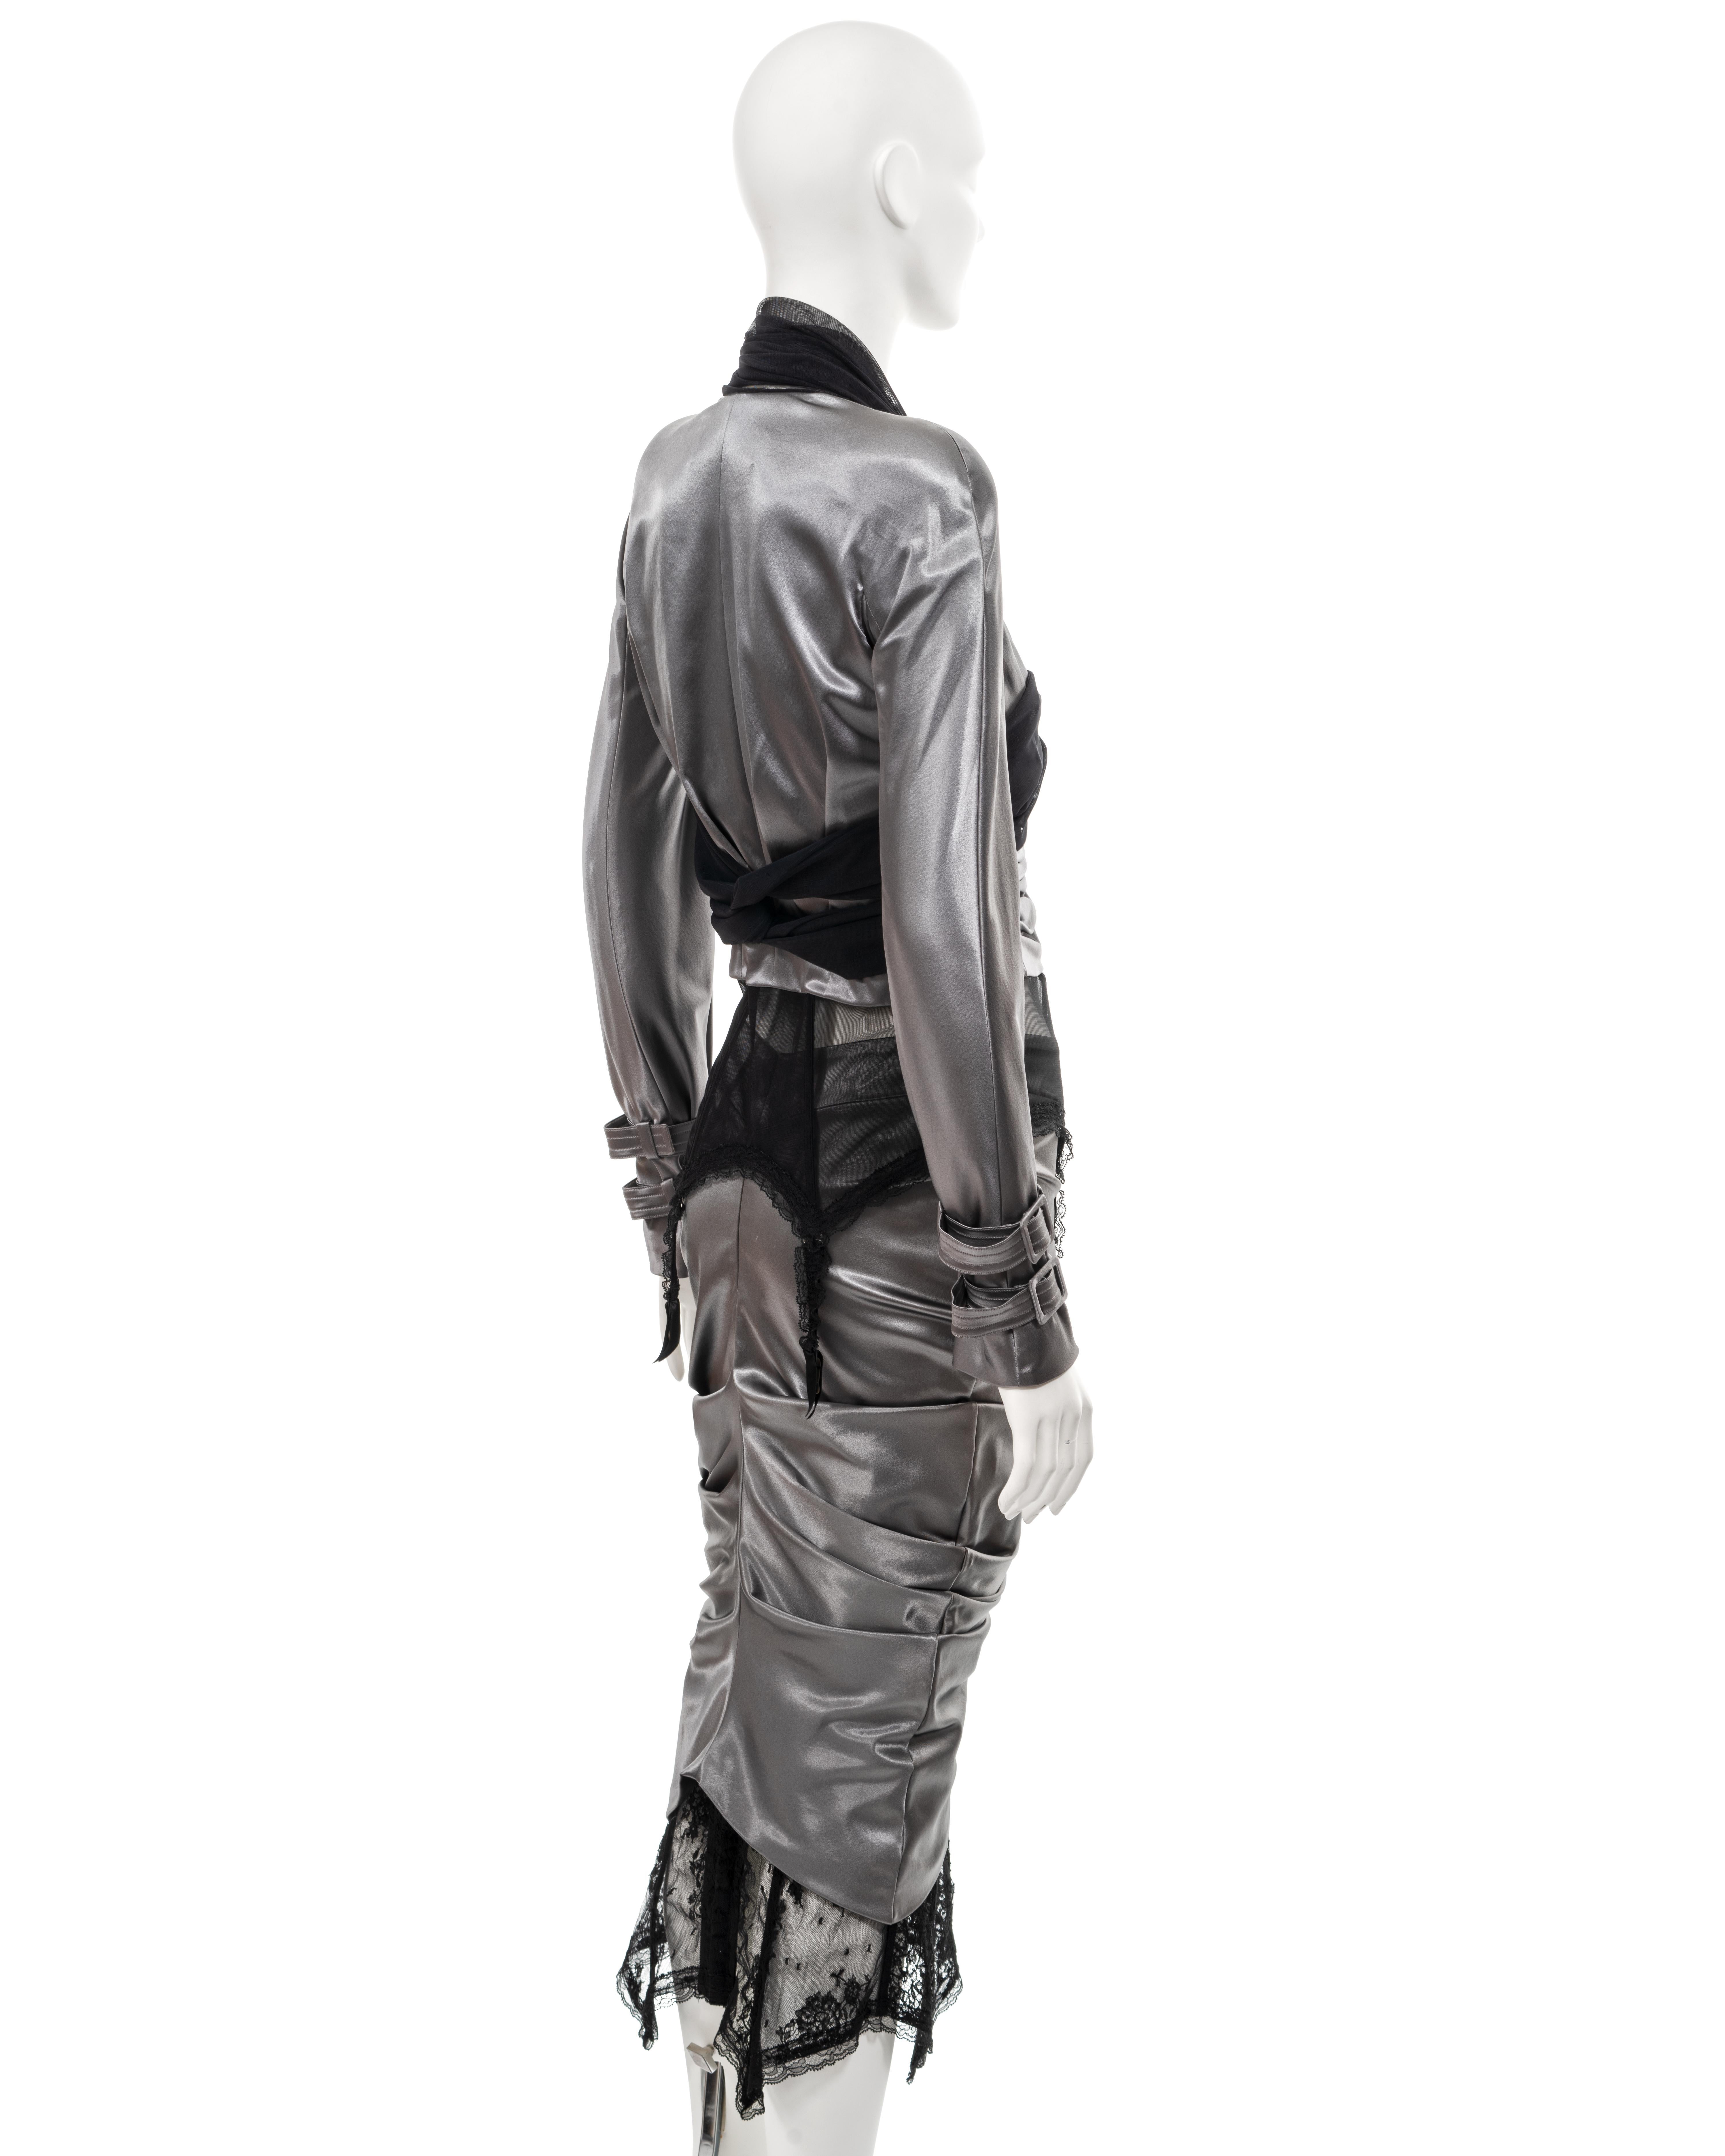 Christian Dior by John Galliano silver-grey stretch satin skirt suit, ss 2004 6